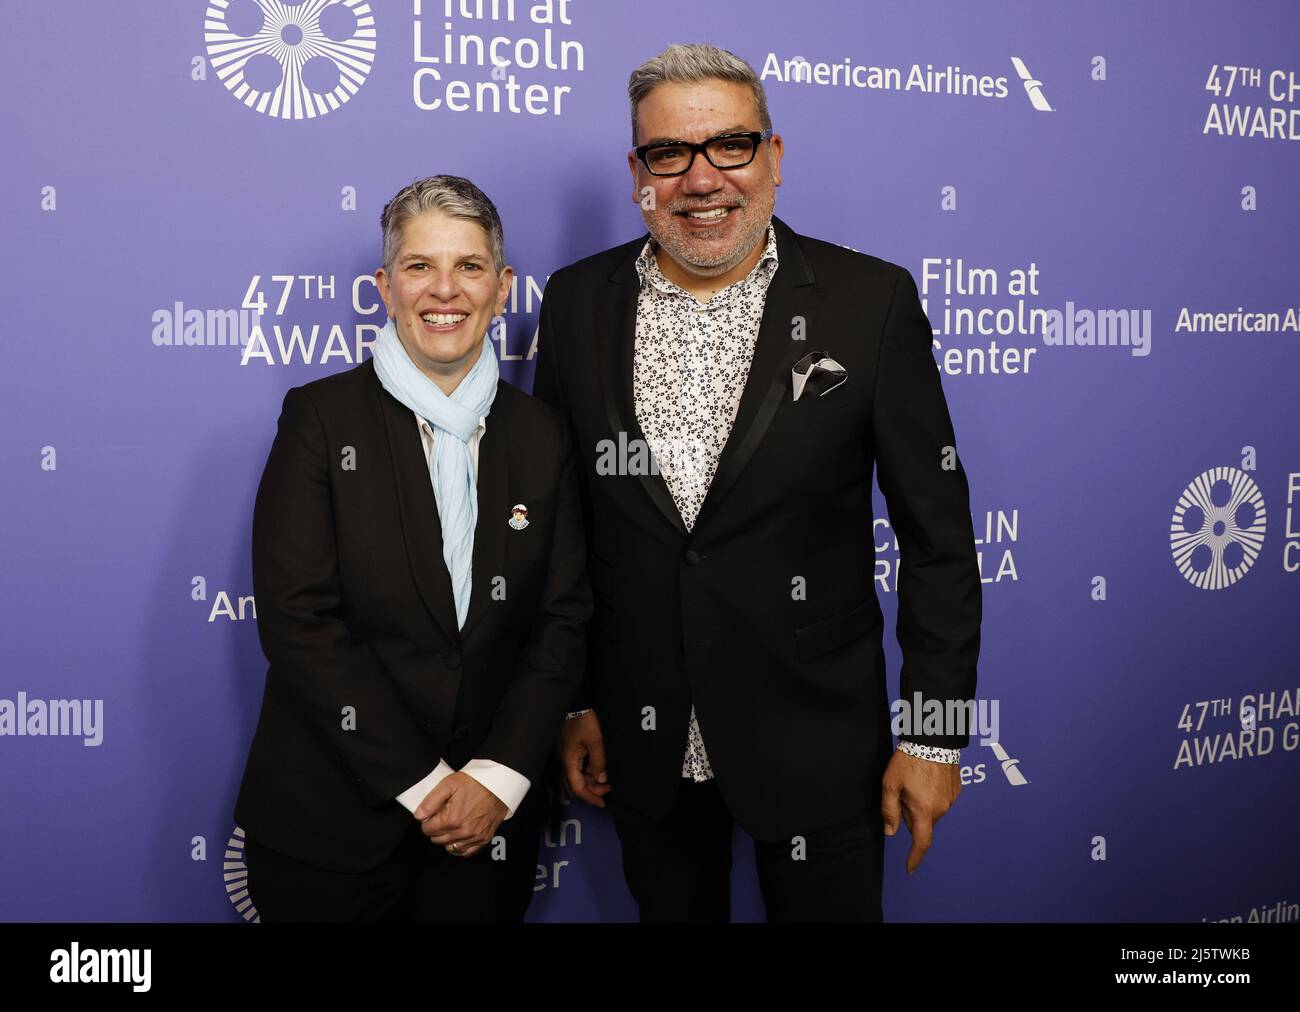 New York, United States. 25th Apr, 2022. FLC President Lesli Klainberg and Senior Vice President of FLC and Executive Director of the New York Film Festival Eugene Hernandez arrive on the red carpet at the 47th Chaplin Award Gala honoring Cate Blanchett at Alice Tully Hall, Lincoln Center in New York City on Monday, April 25, 2022. Photo by John Angelillo/UPI Credit: UPI/Alamy Live News Stock Photo